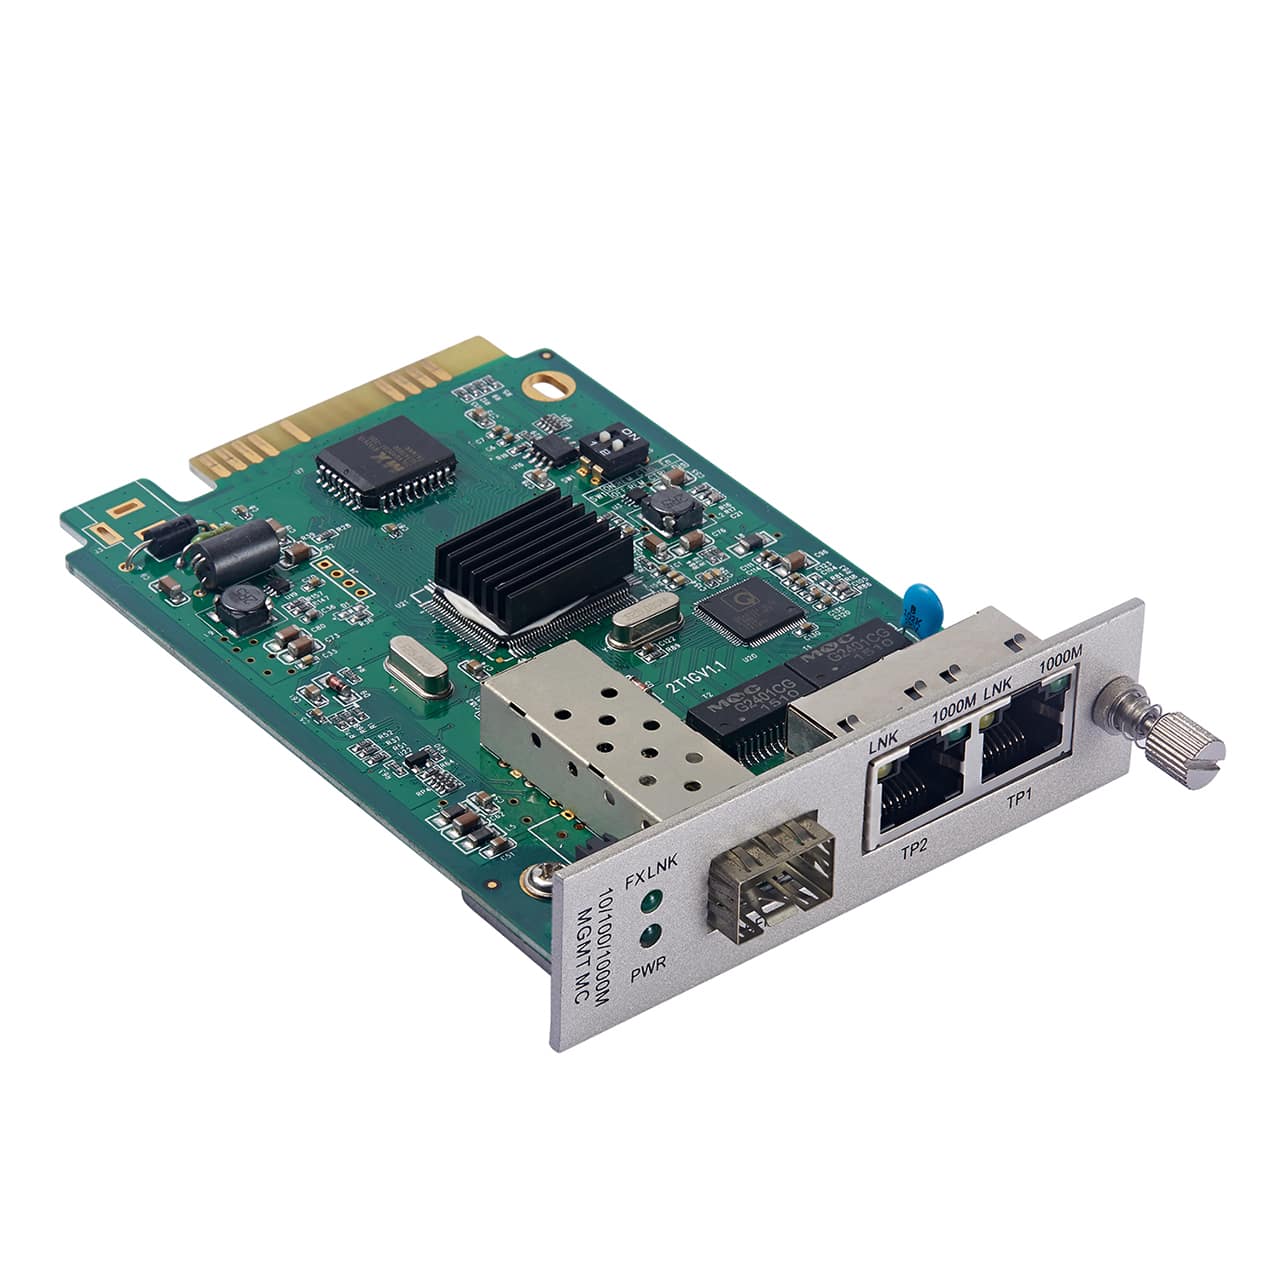 The thumbnail of 2-Port 10/100/1000Base-TX to 1000Base-FX Managed GbE Media Converter Card